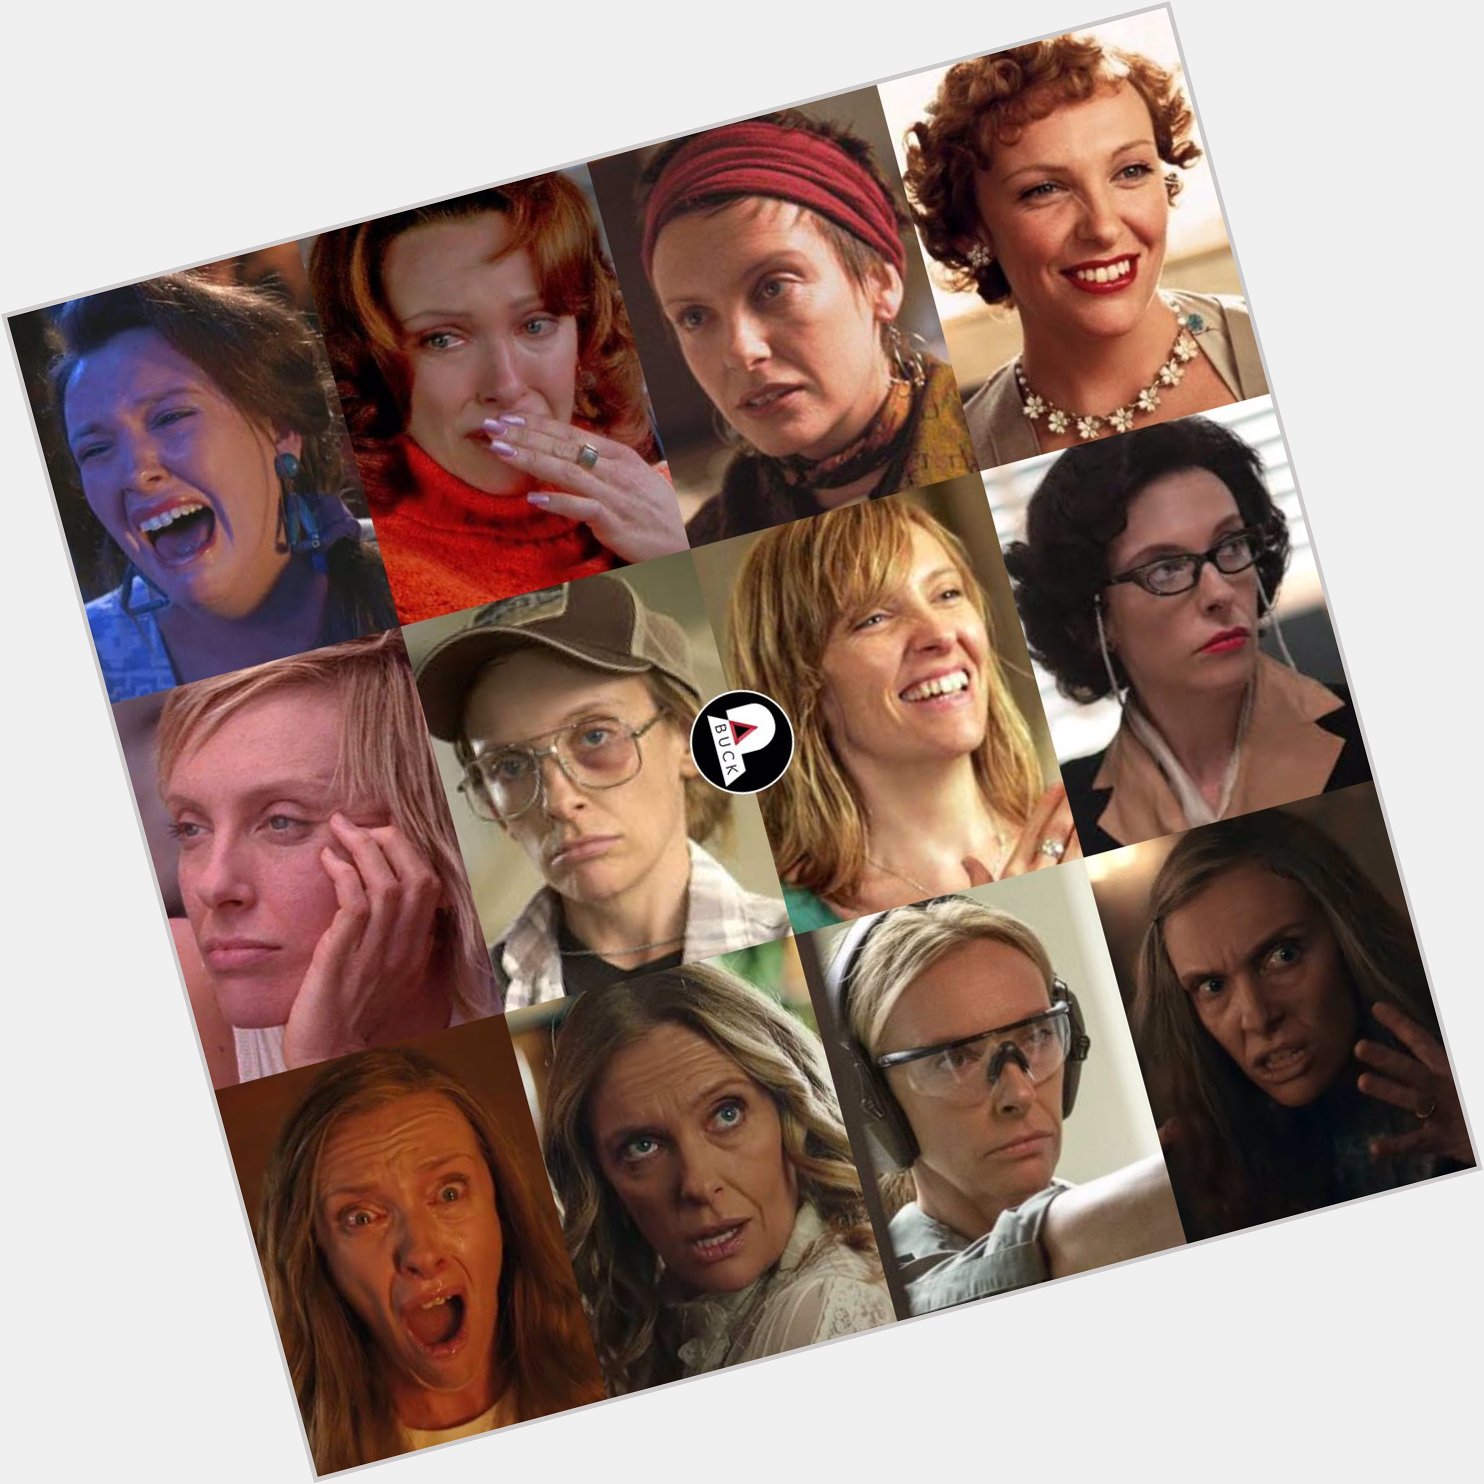 Happy birthday to one of my favorite actresses of all time!  What is your favorite Toni Collette performance? 